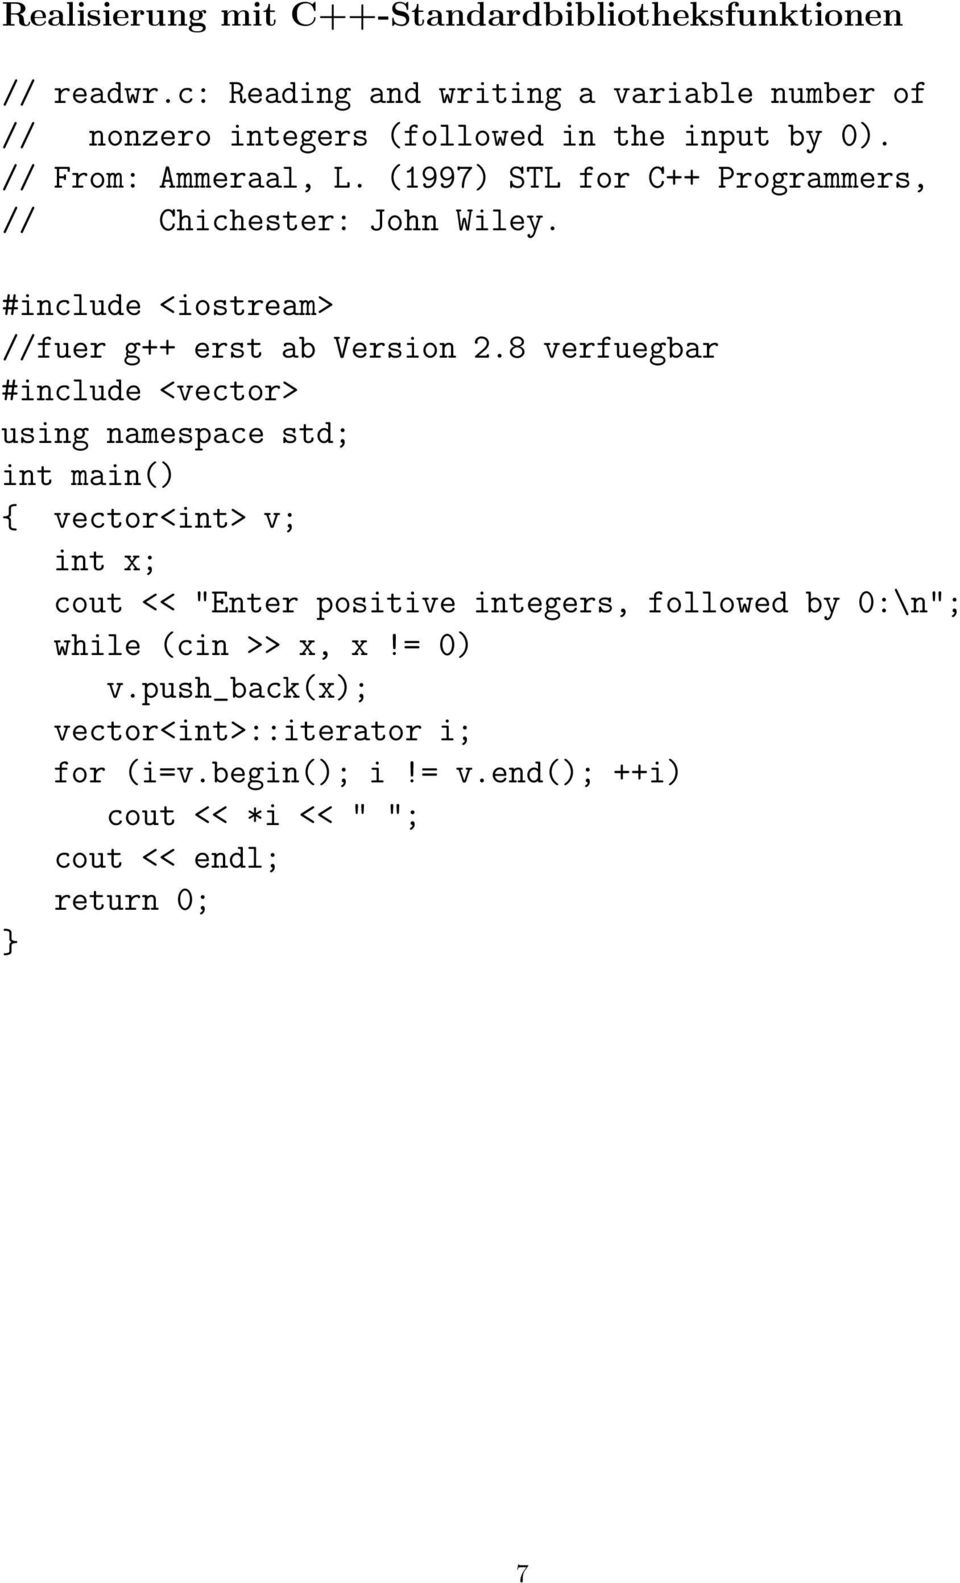 (1997) STL for C++ Programmers, // Chichester: John Wiley. #include <iostream> //fuer g++ erst ab Version 2.